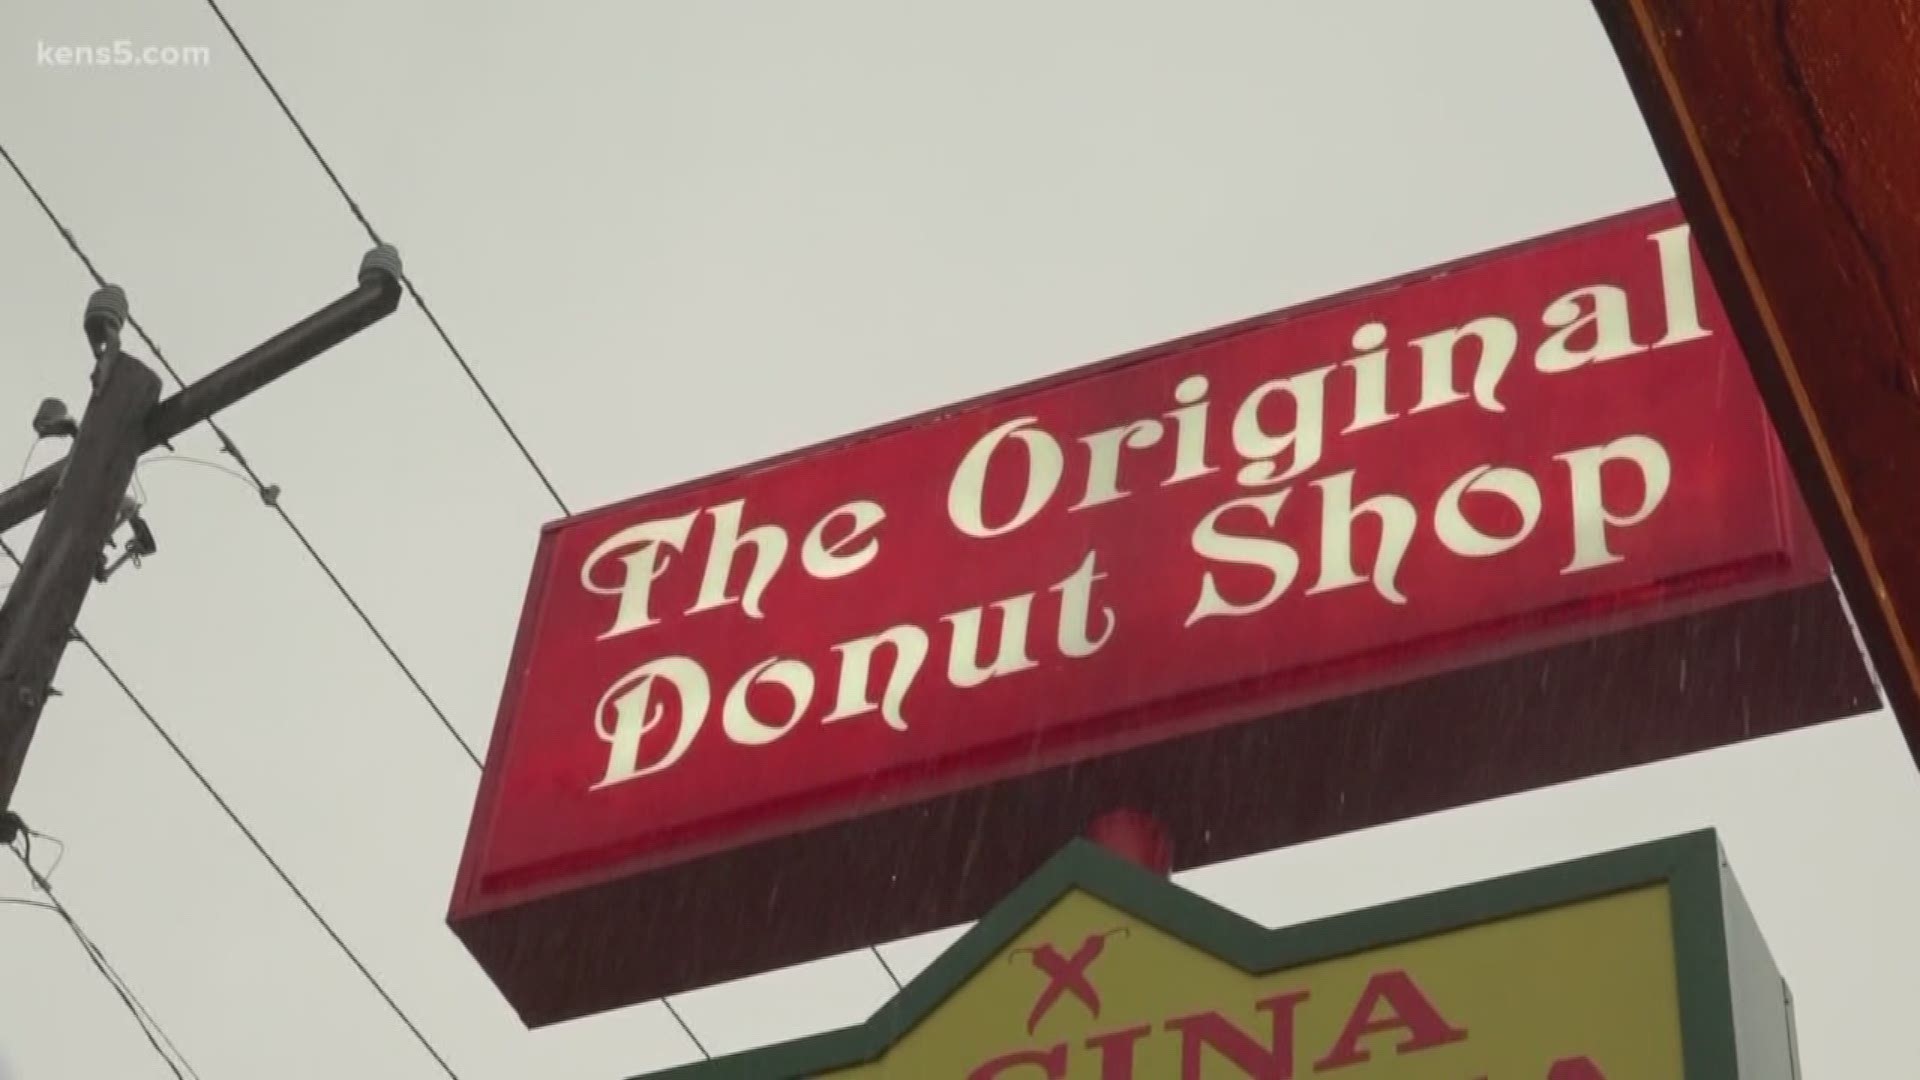 The Original Donut shop is more customer friendly than ever after making a small change that's having big consequences after being open for 64 years.